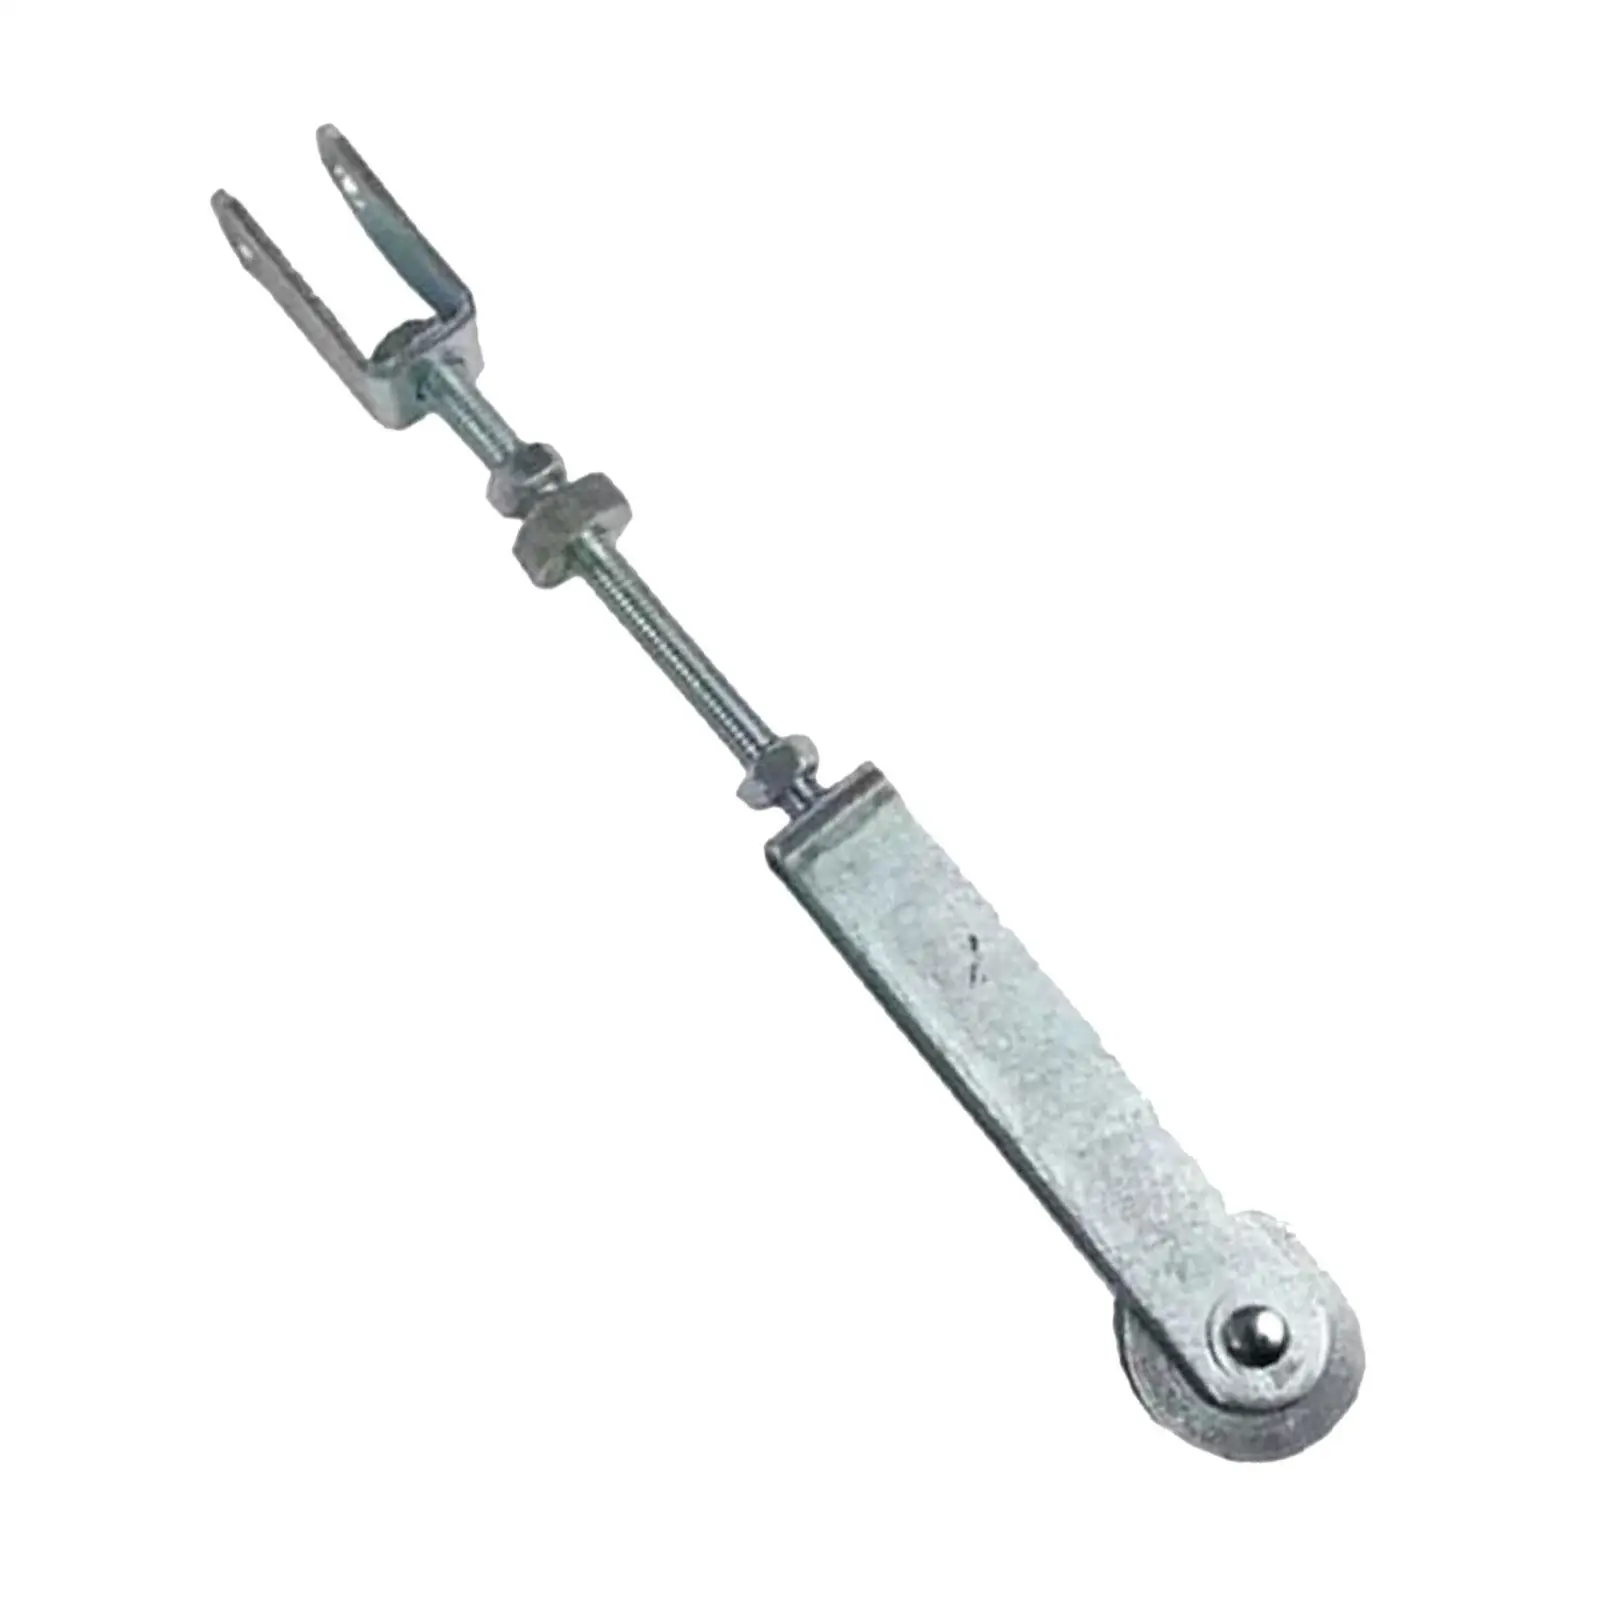 Parking Brake Cable Adjuster Stainless Steel Galvanized for Car Ramp